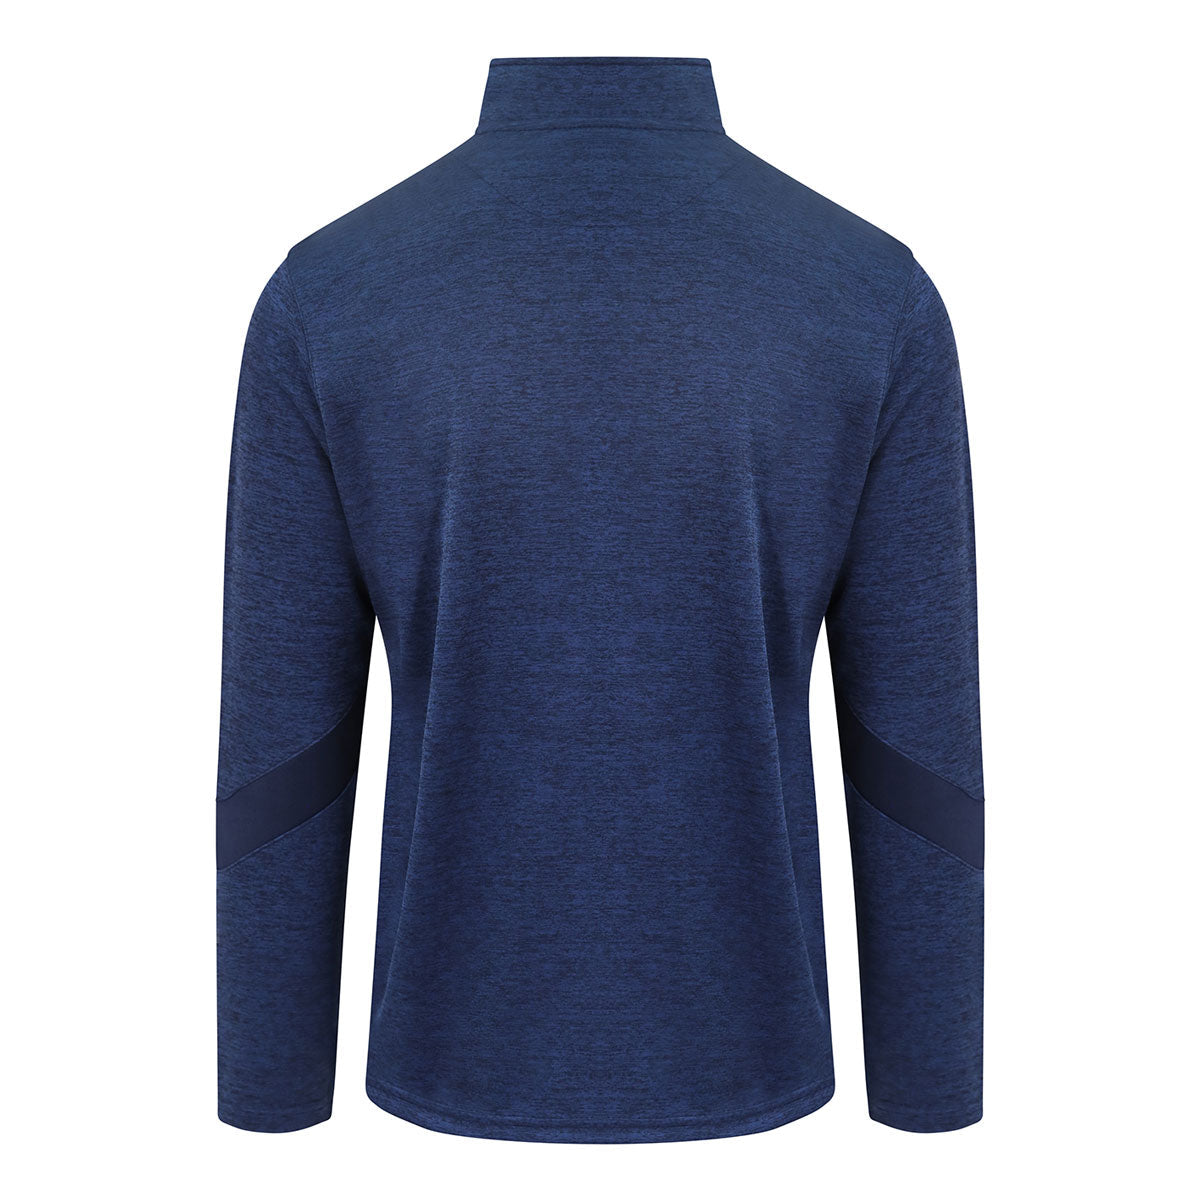 Mc Keever CLG Ghaoth Dobhair Core 22 1/4 Zip Top - Youth - Navy